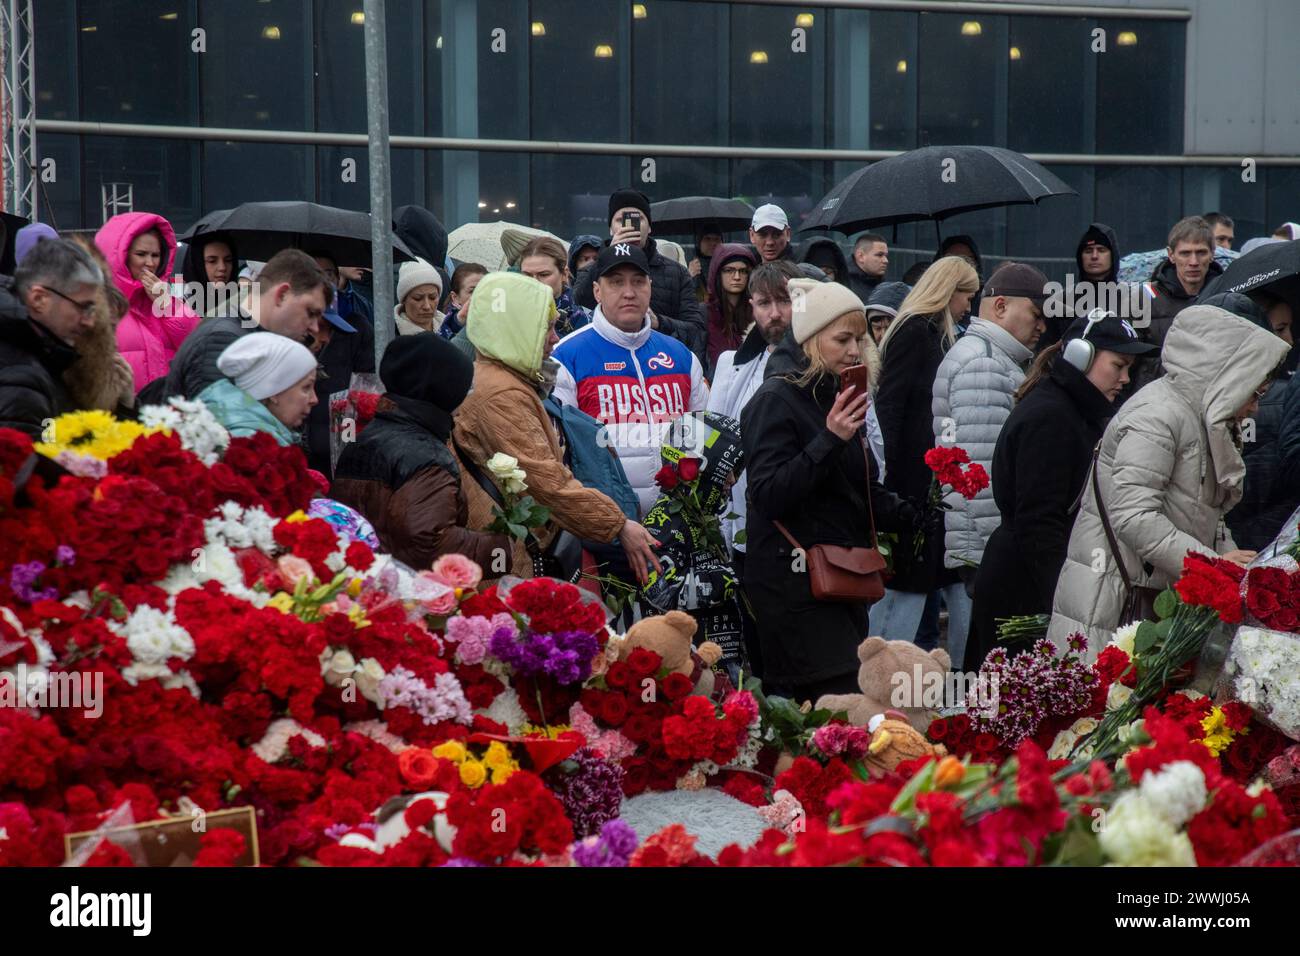 Moscow region, Russia. 24th of March, 2024. People bring flowers to a makeshift memorial outside the Crocus City Hall to commemorating the terrorist attack victims, Russia. Unidentified gunmen opened fire before the start of a concert at the Crocus City Hall in the town of Krasnogorsk near Moscow, and set off explosives that started a massive fire in the building. According to recent reports, 133 people were killed and 285 injured. Credit: Nikolay Vinokurov/Alamy Live News Stock Photo